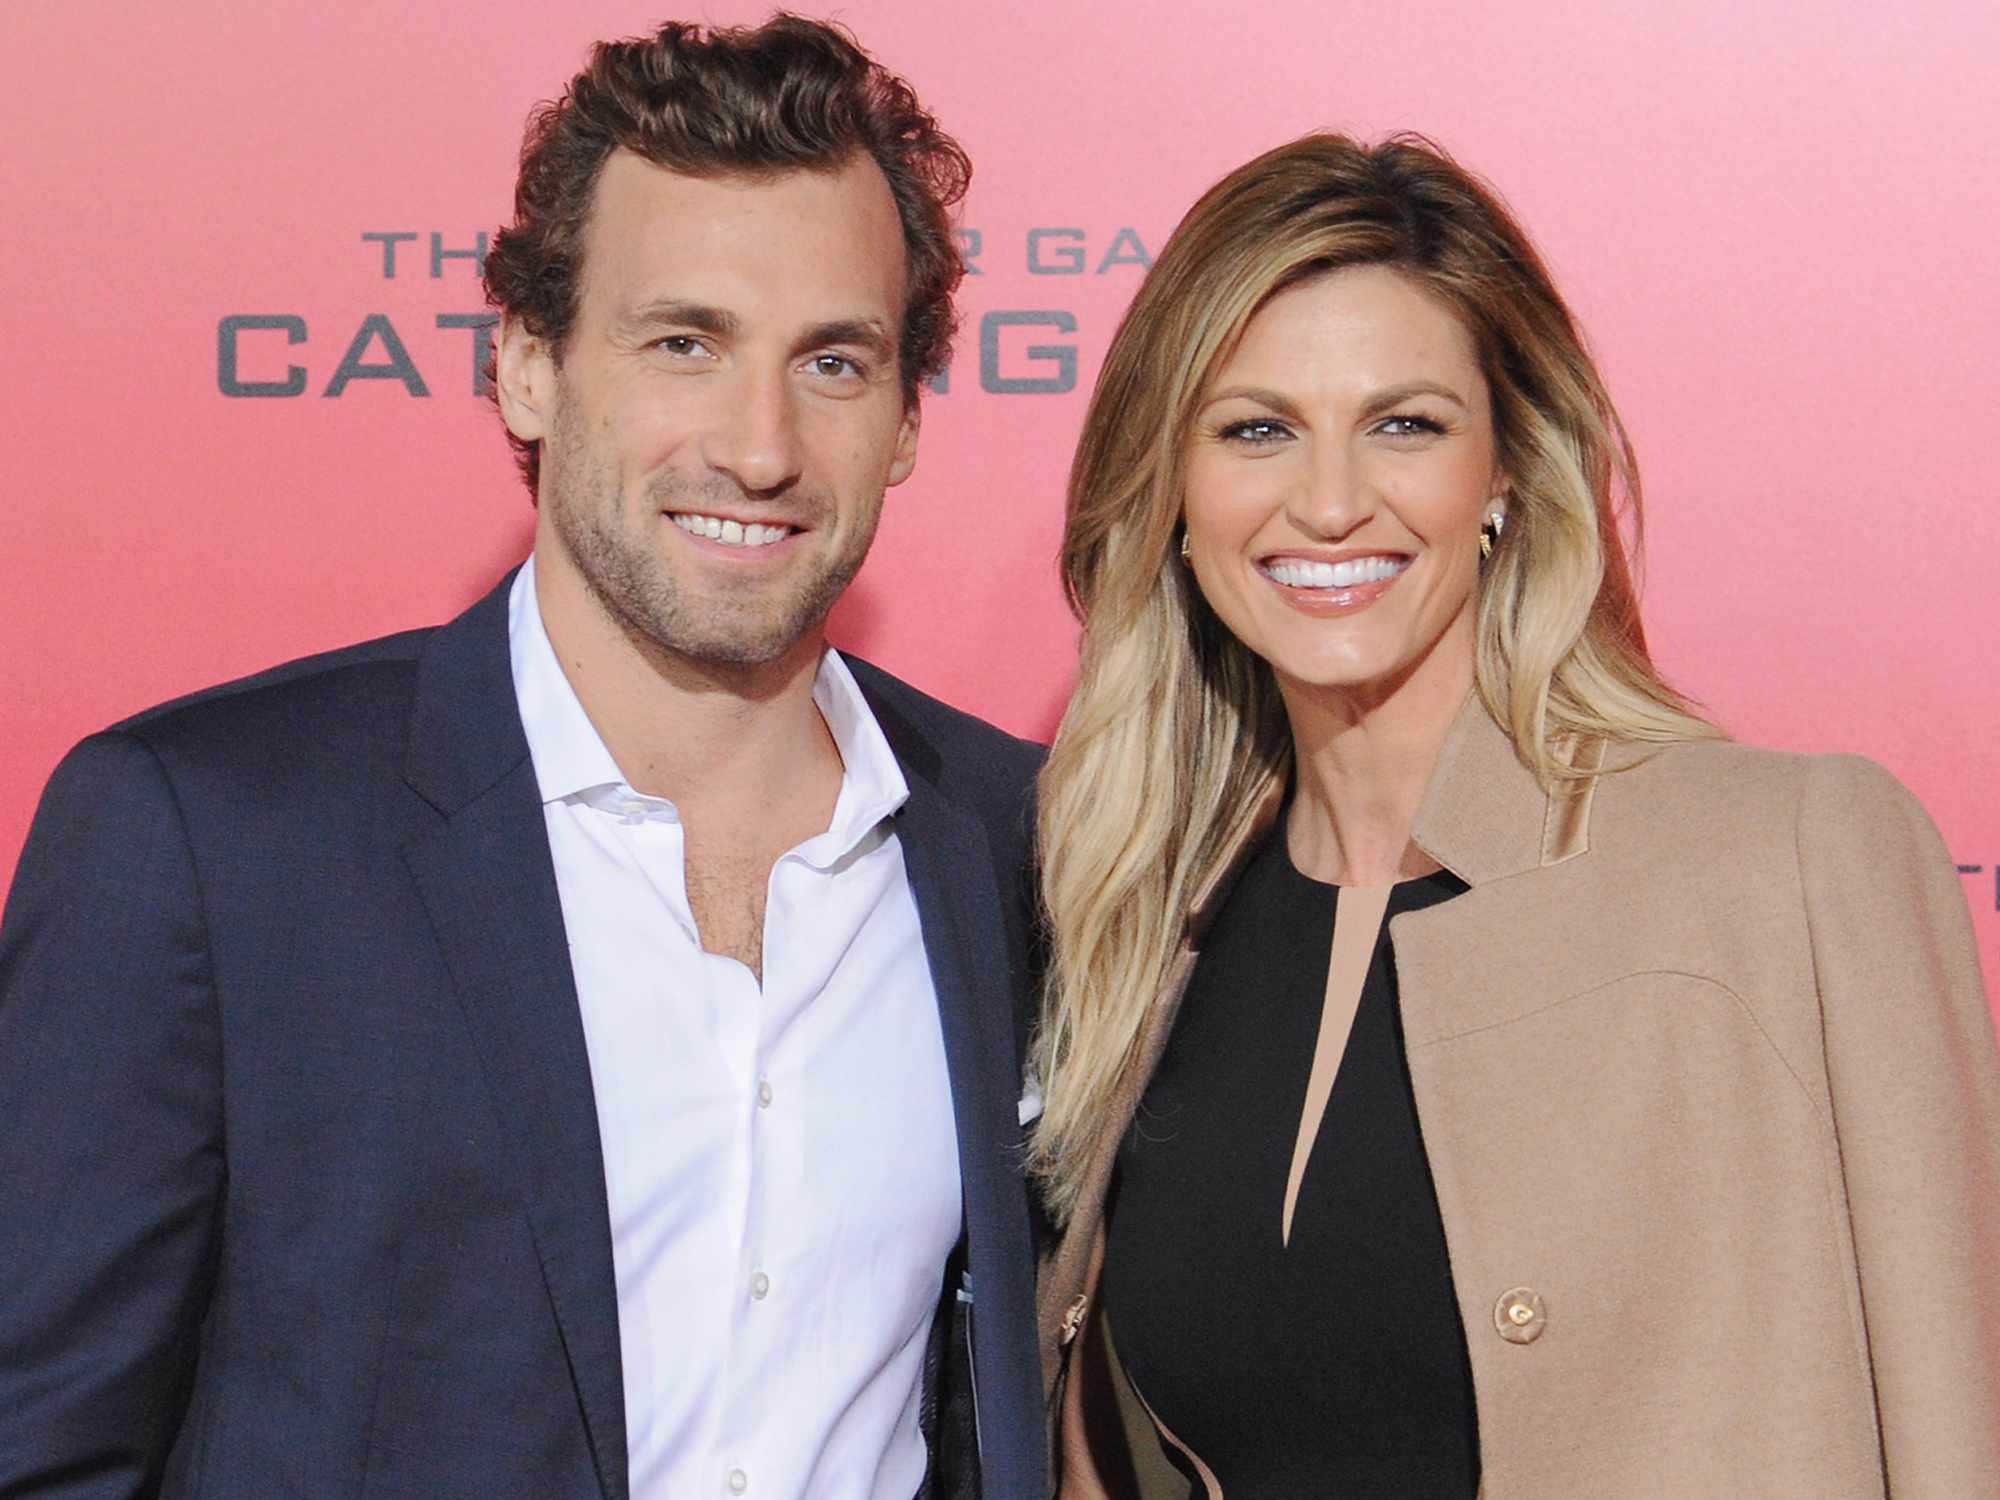 Jarret Stoll and Erin Andrews at the Los Angeles Premiere "The Hunger Games: Catching Fire"